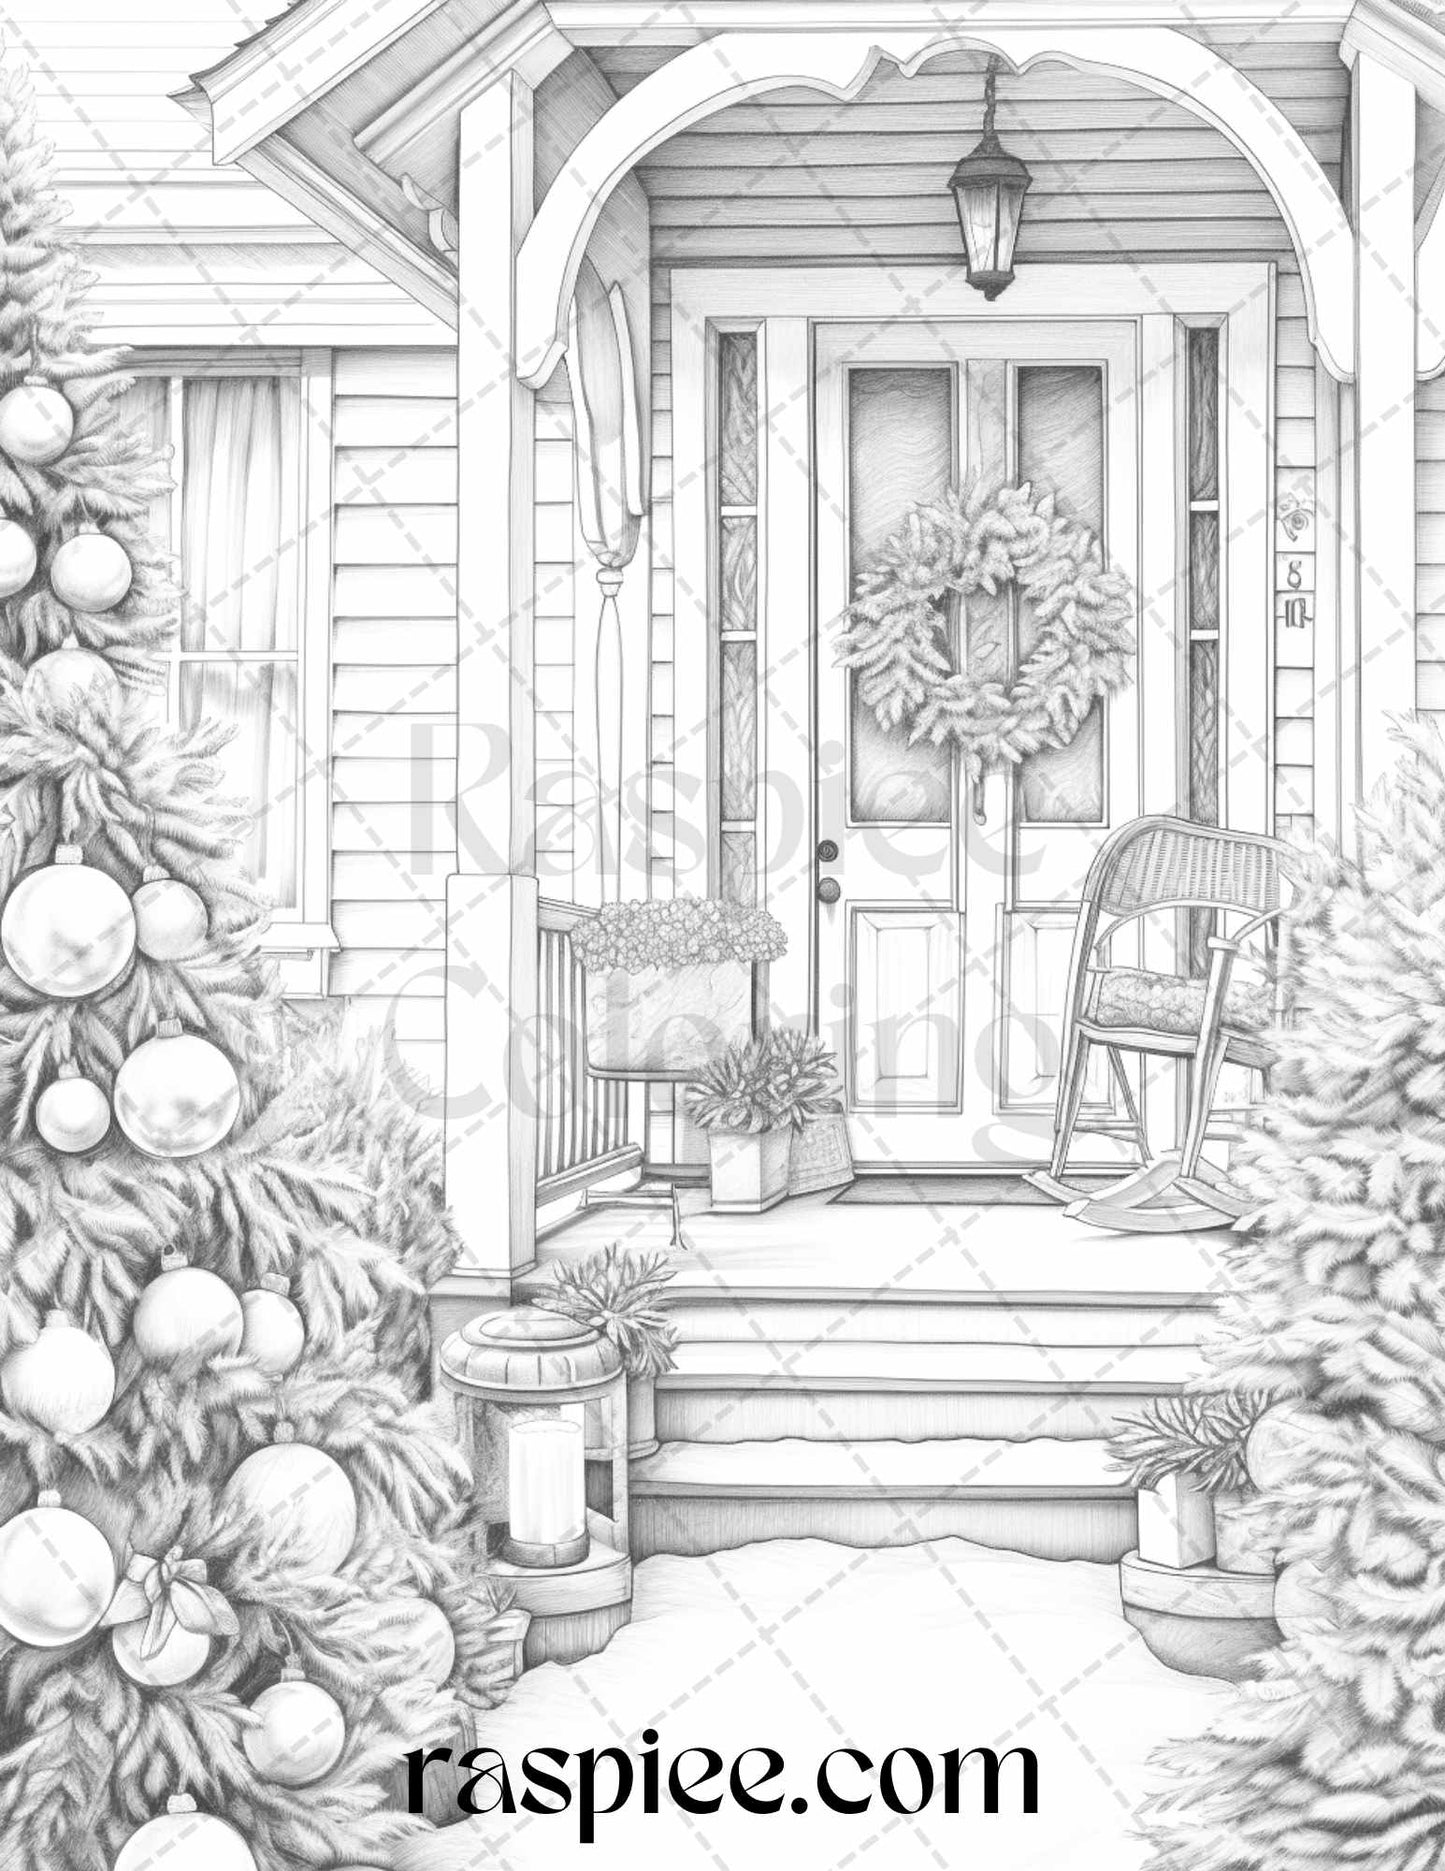 Christmas decoration grayscale coloring page, Adult printable coloring page, Festive holiday coloring pattern, Christmas ornaments coloring image, Xmas coloring design for adults